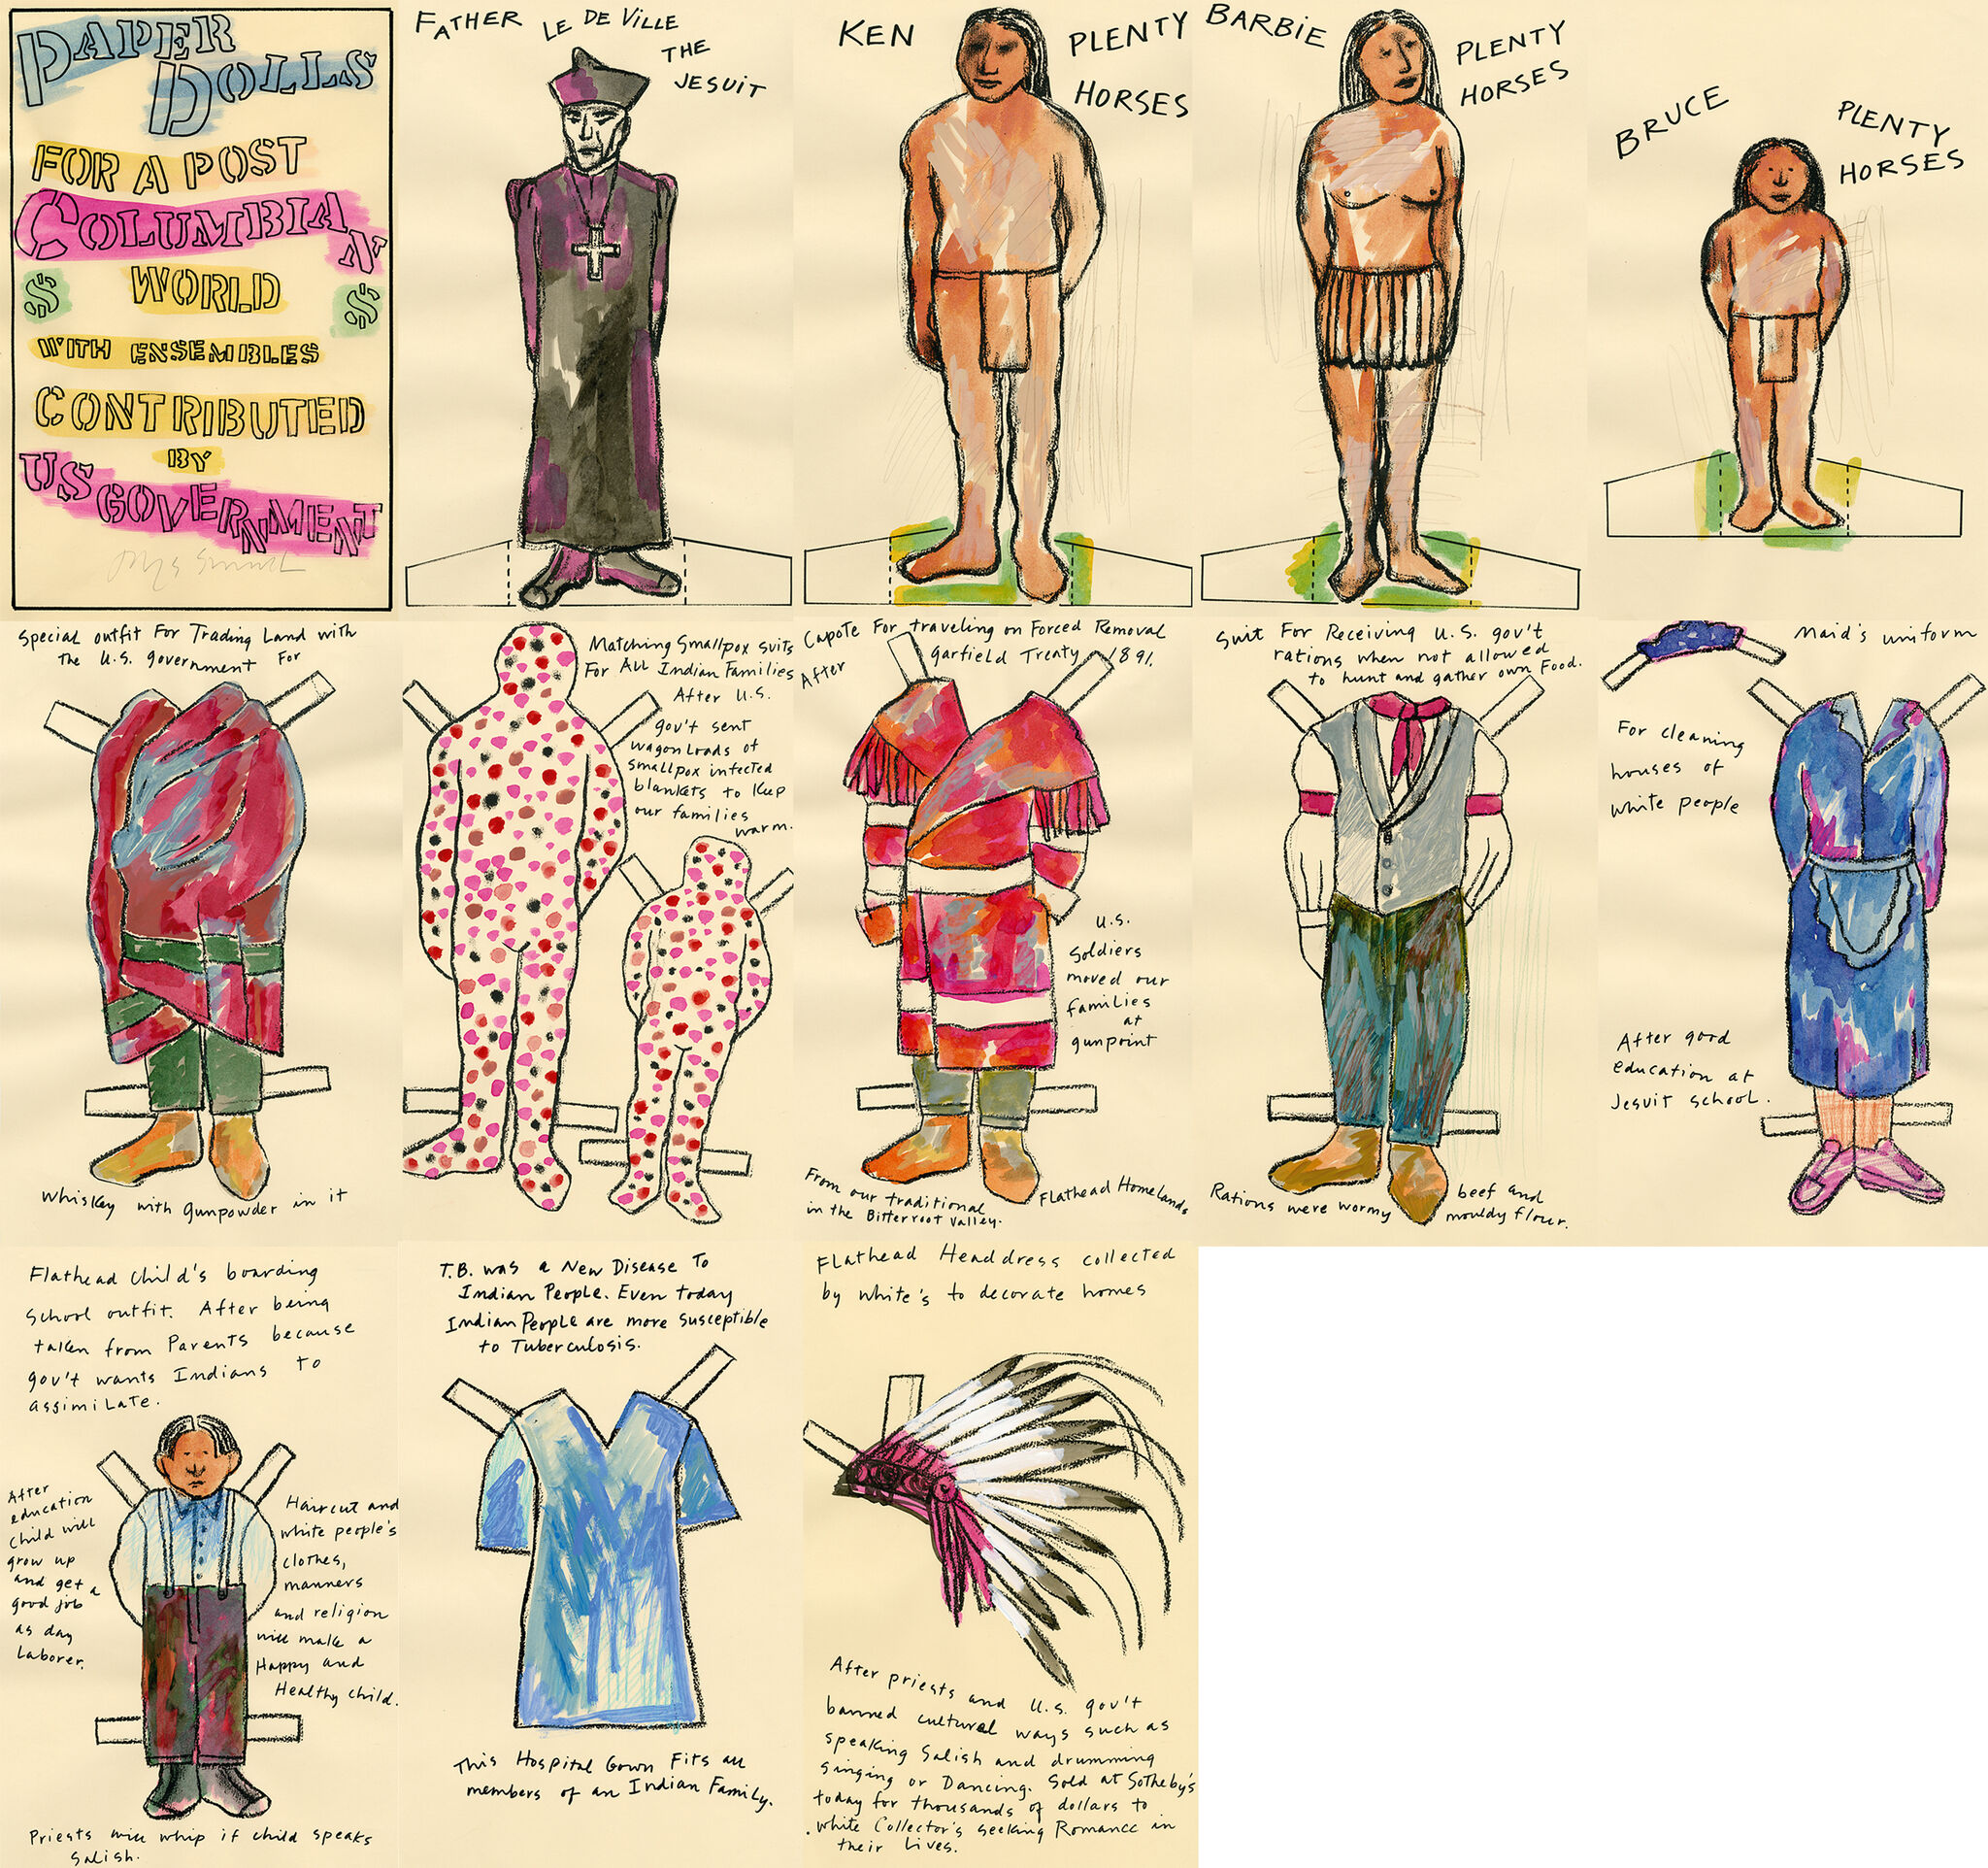 A sheet of paper dolls with outfit options showing devastating circumstances. 